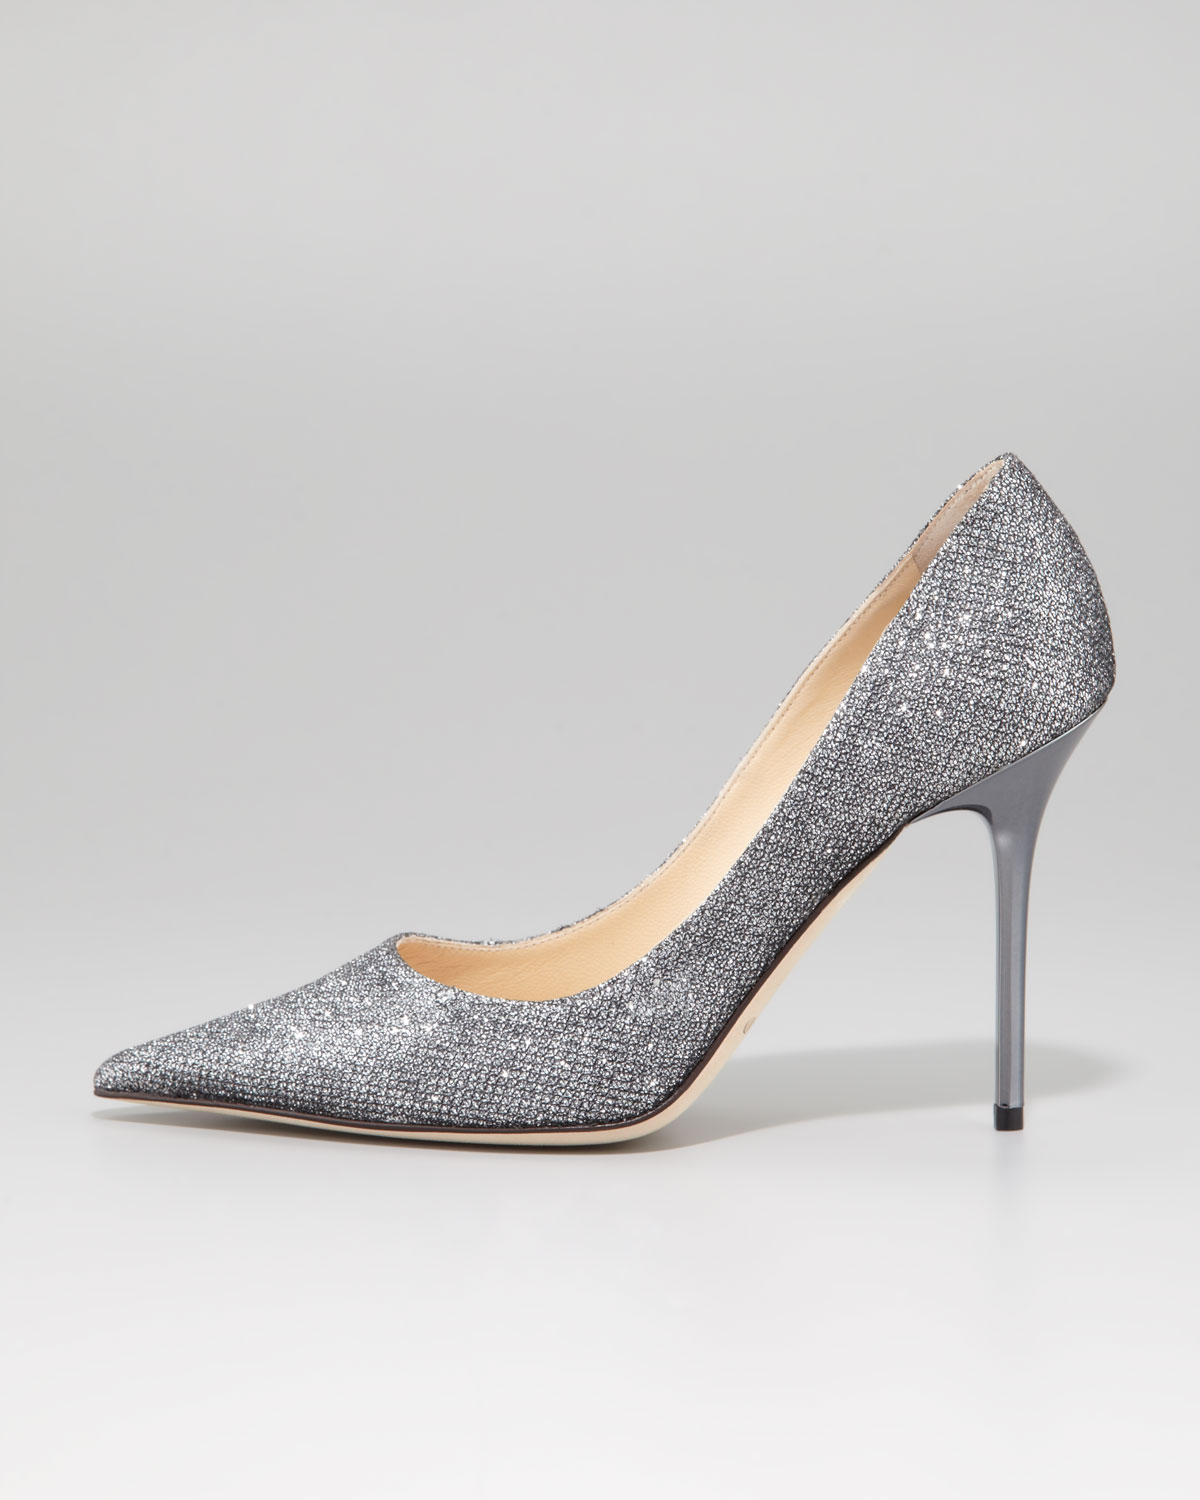 Lyst - Jimmy Choo Abel Glitter Pointed Pump Anthracite in Gray